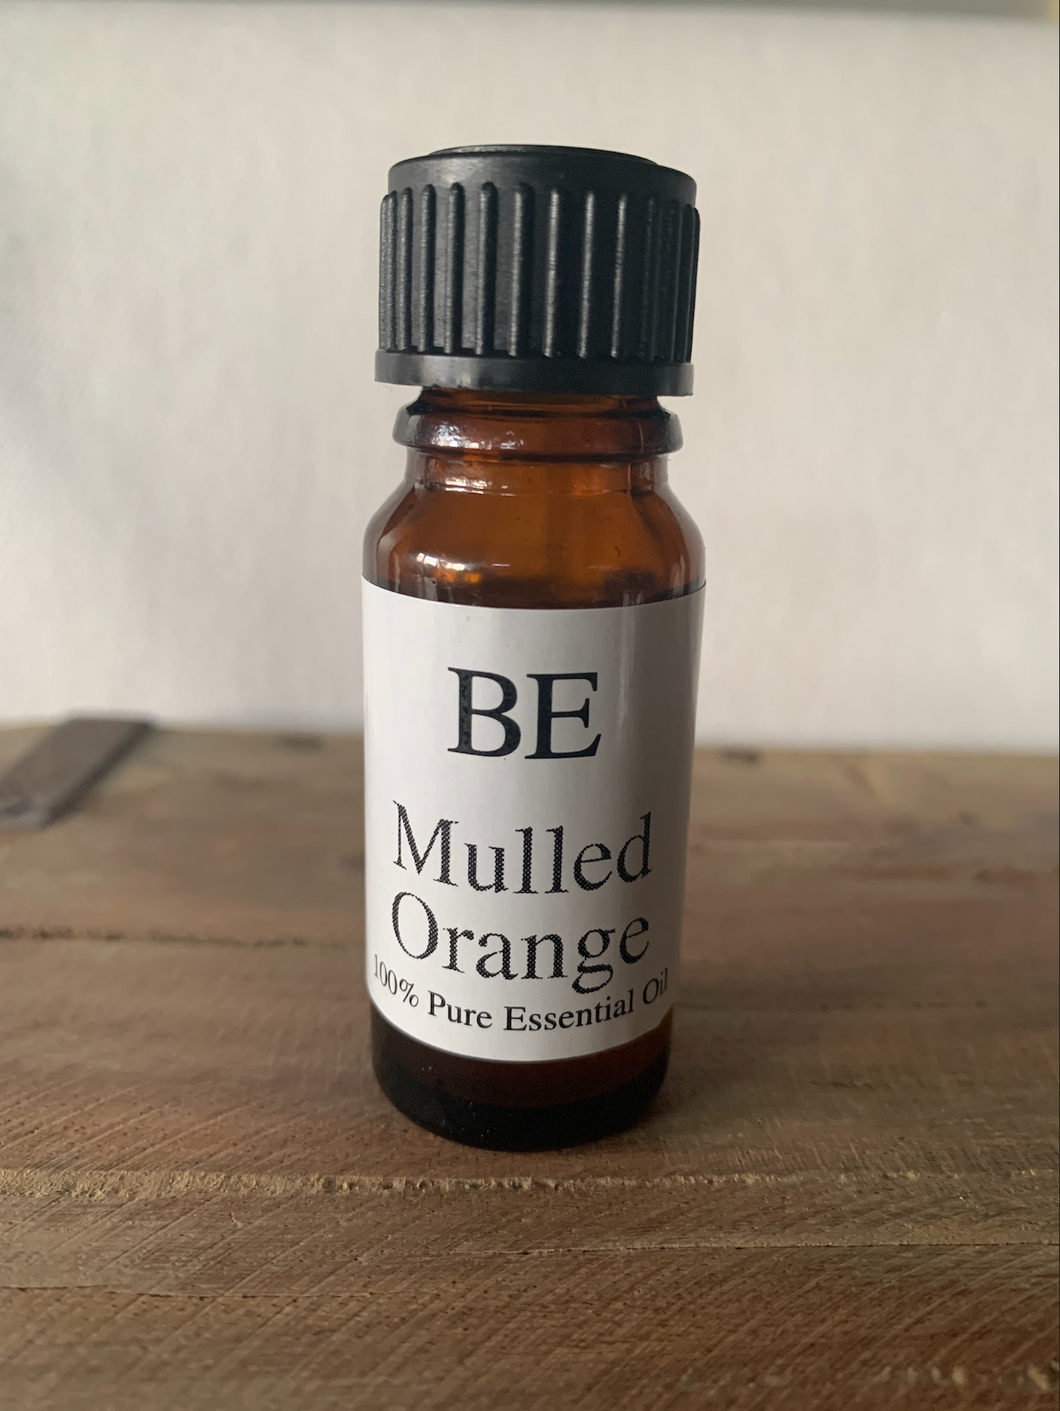 An essential oil blend of orange, cedarwood and clove - a gently festive scent that can be enjoyed all year round.